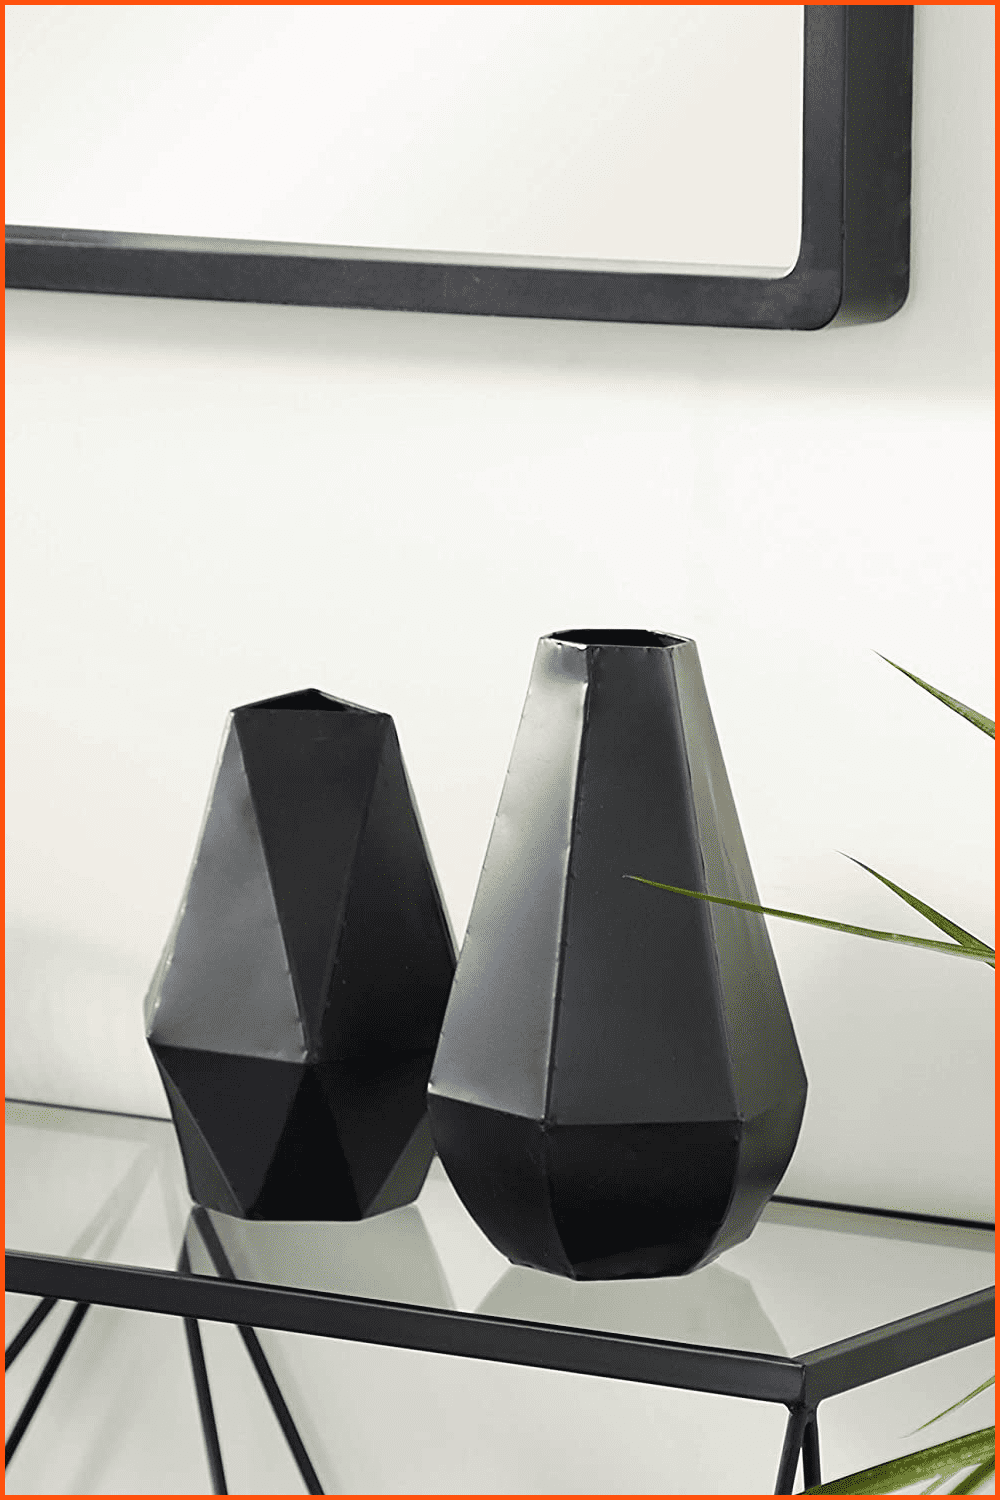 Black Contemporary Geometric Metal Vases on the table.